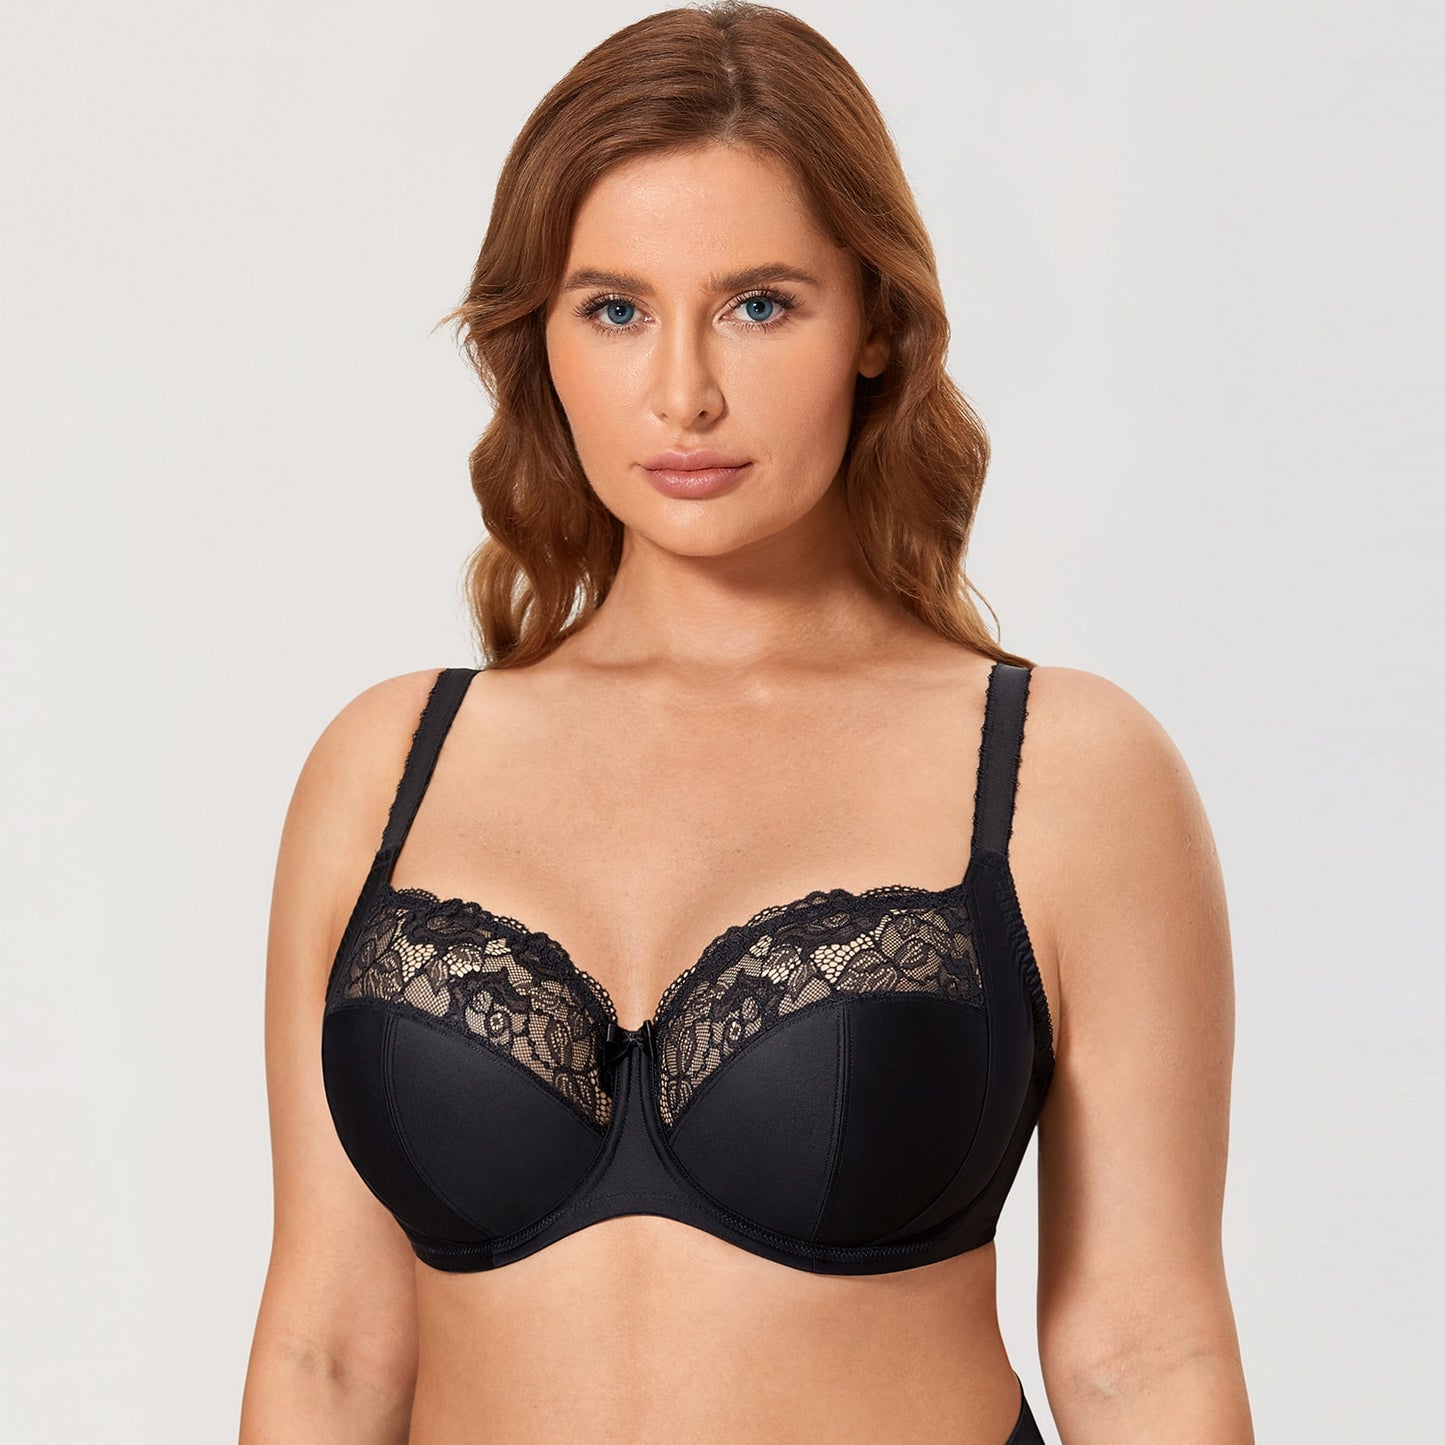 SS Online Trading - SSHKStore - Products - Plus size underwired non-padded lace bras